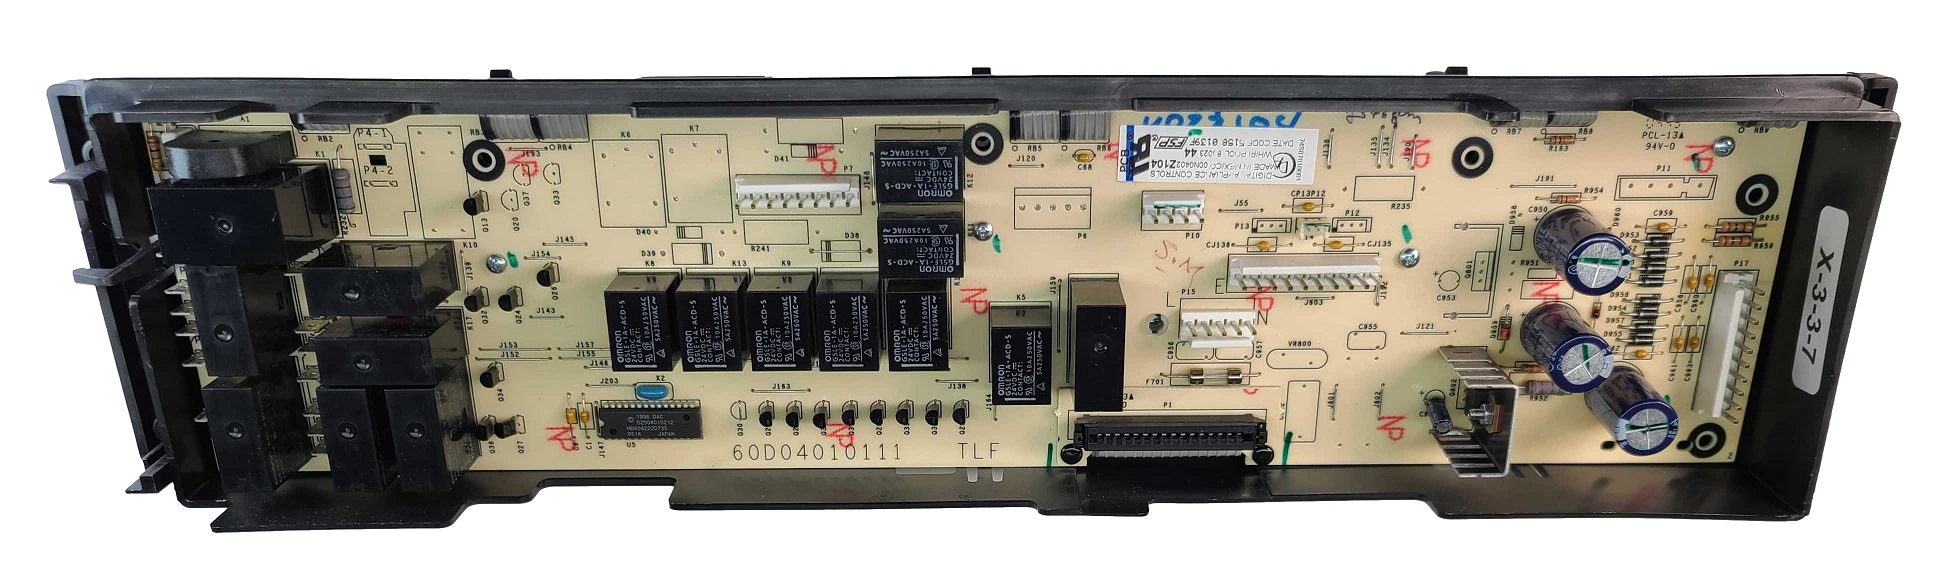 Repair Service For Whirlpool Oven Range Control Board 4452482 